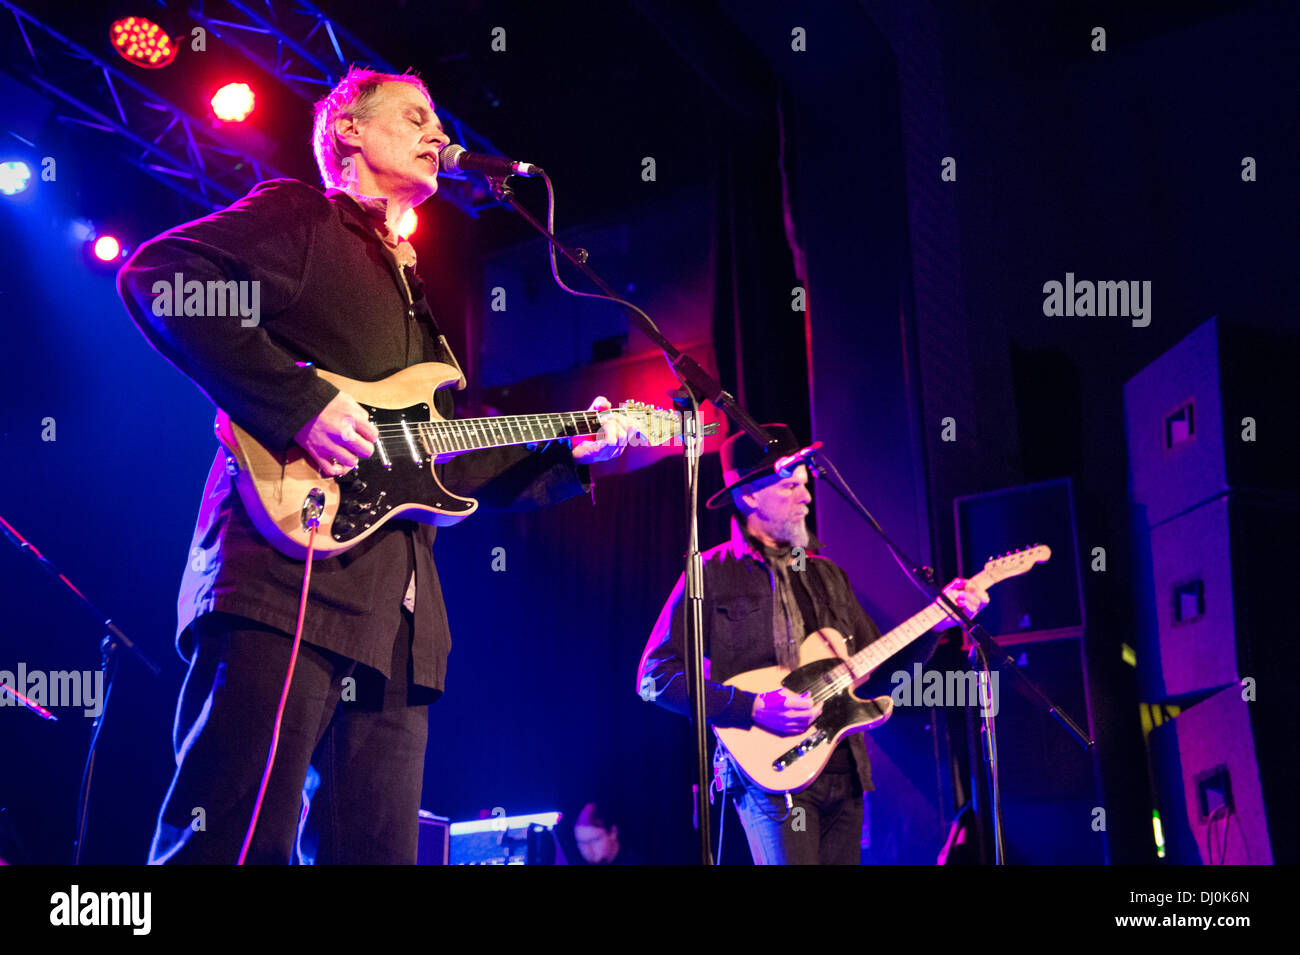 Manchester, UK. 17th November 2013. US rock band Television in concert at Manchester Academy. Tom Verlaine and Jimmy Rip Stock Photo